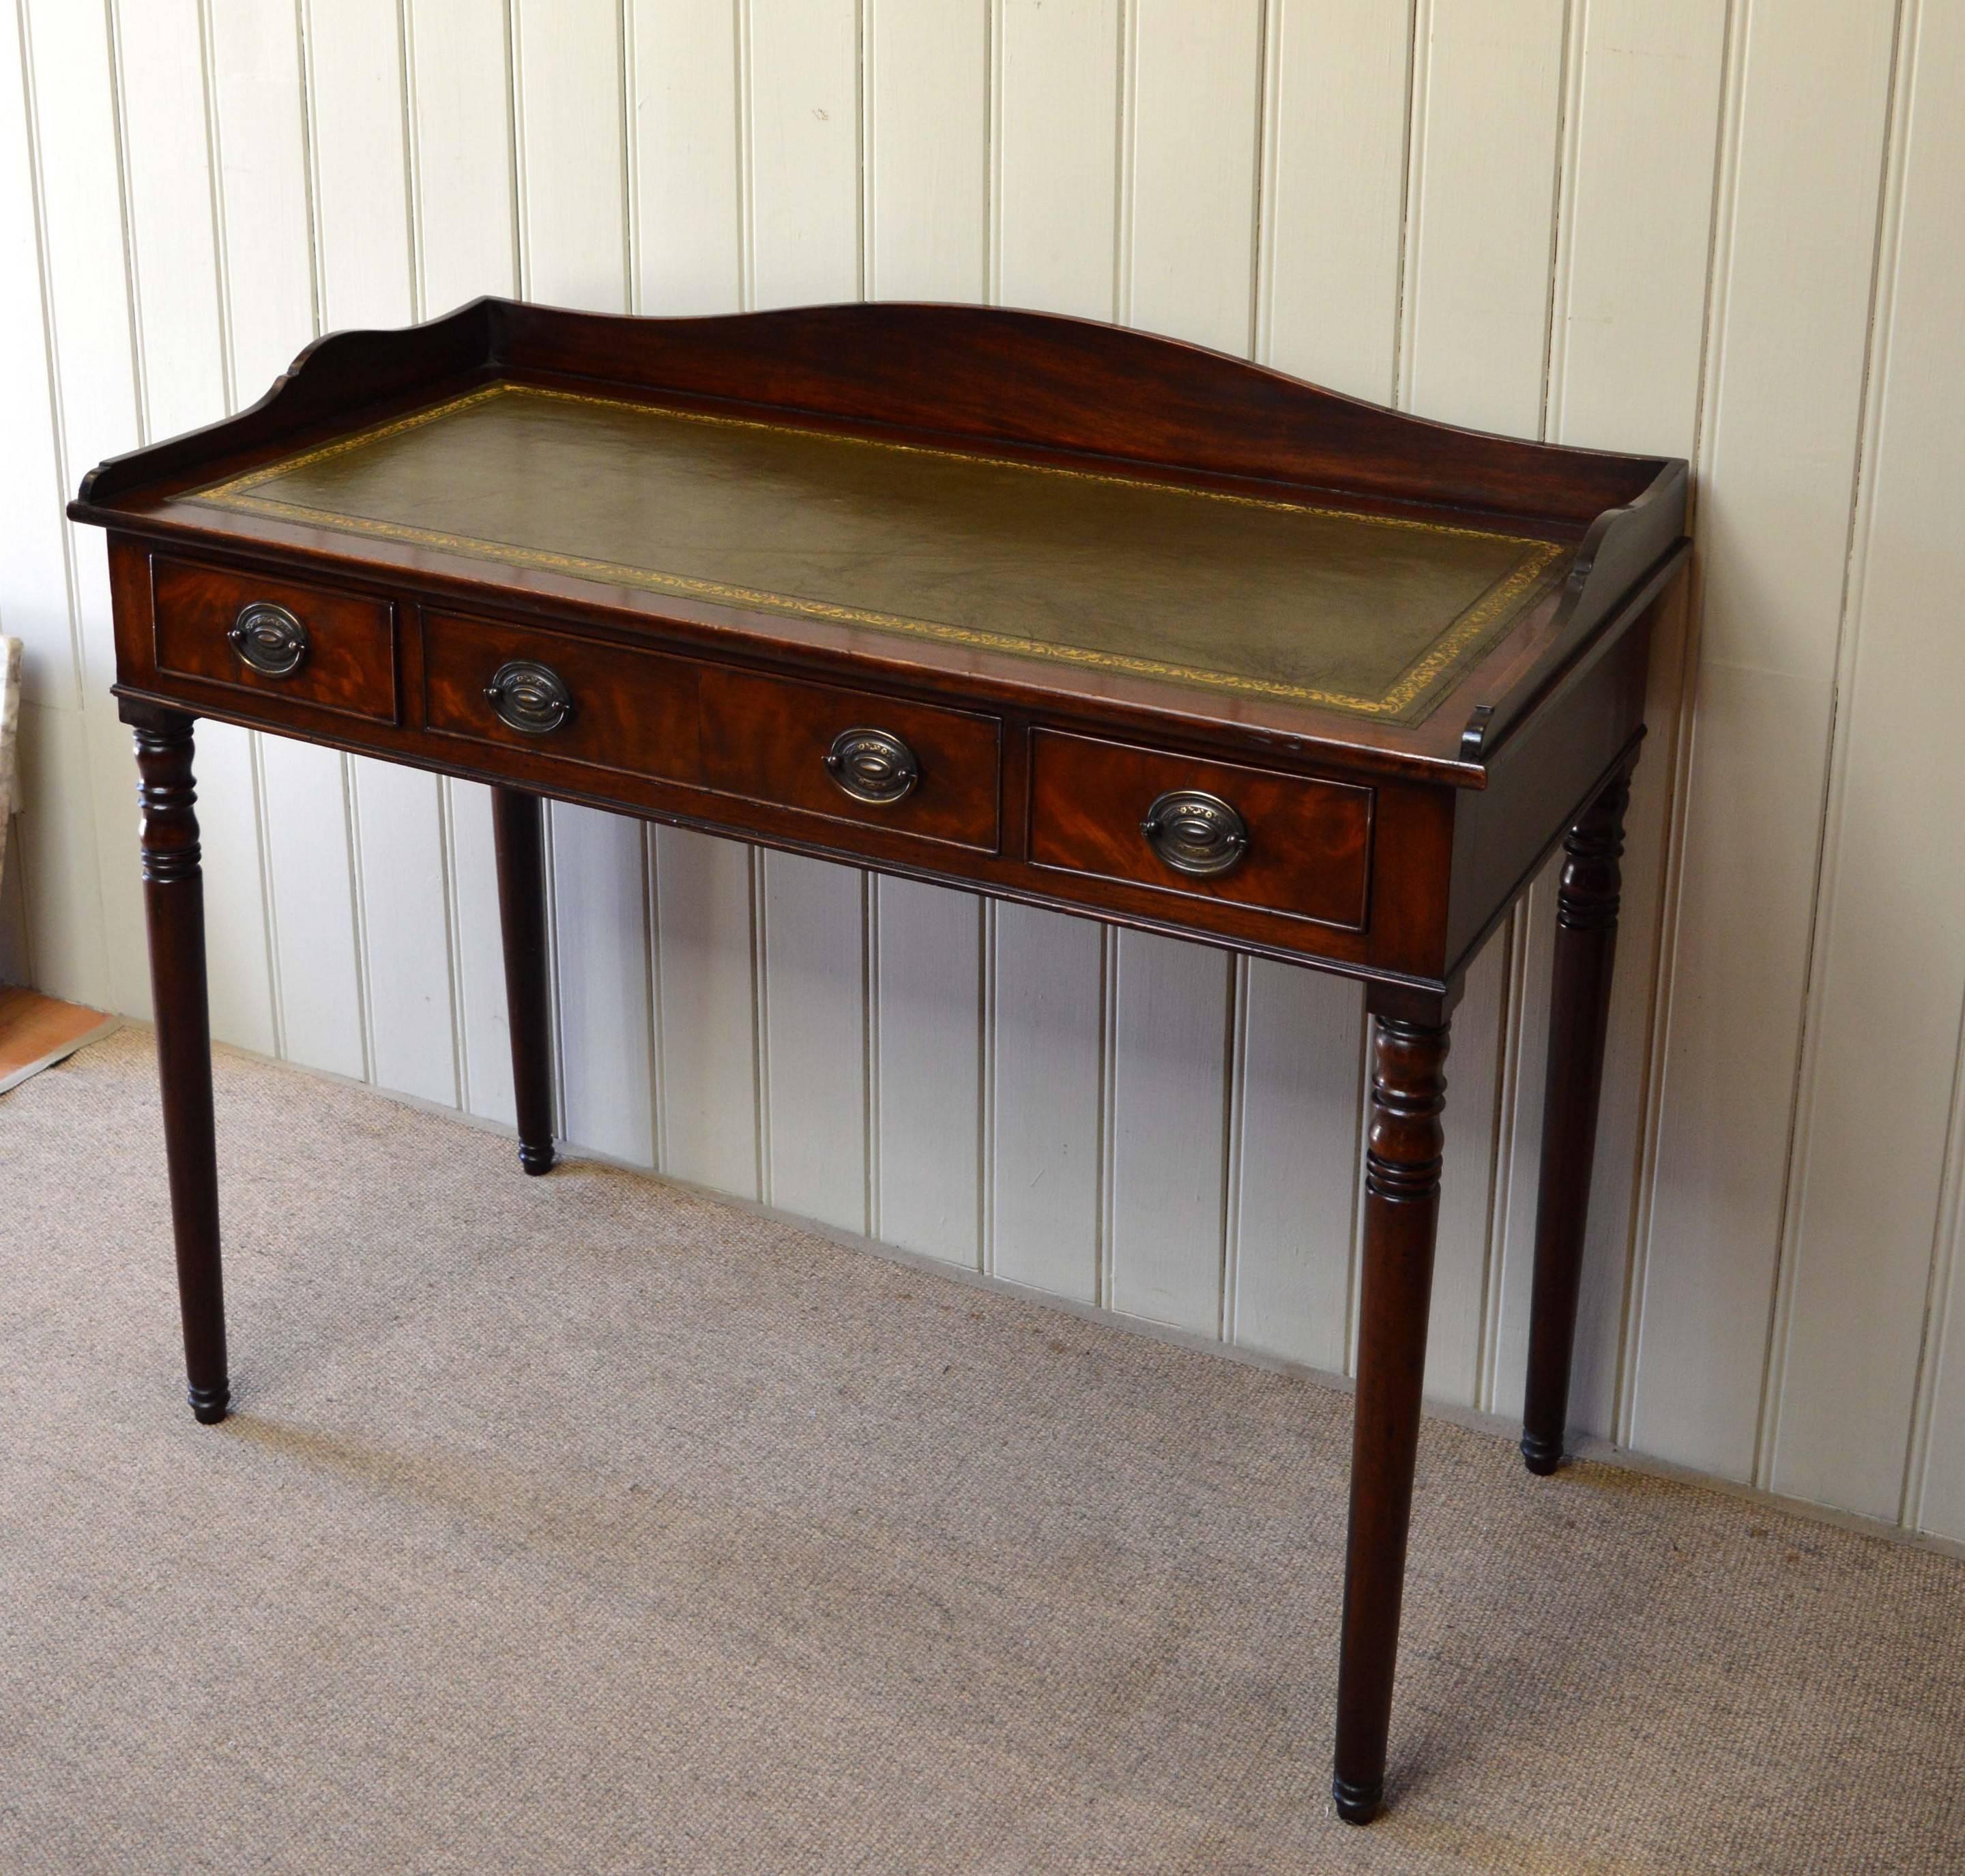 Victorian mahogany writing desk having a central drawer flanked by two smaller with a leather top and upstand, supported by turned legs.